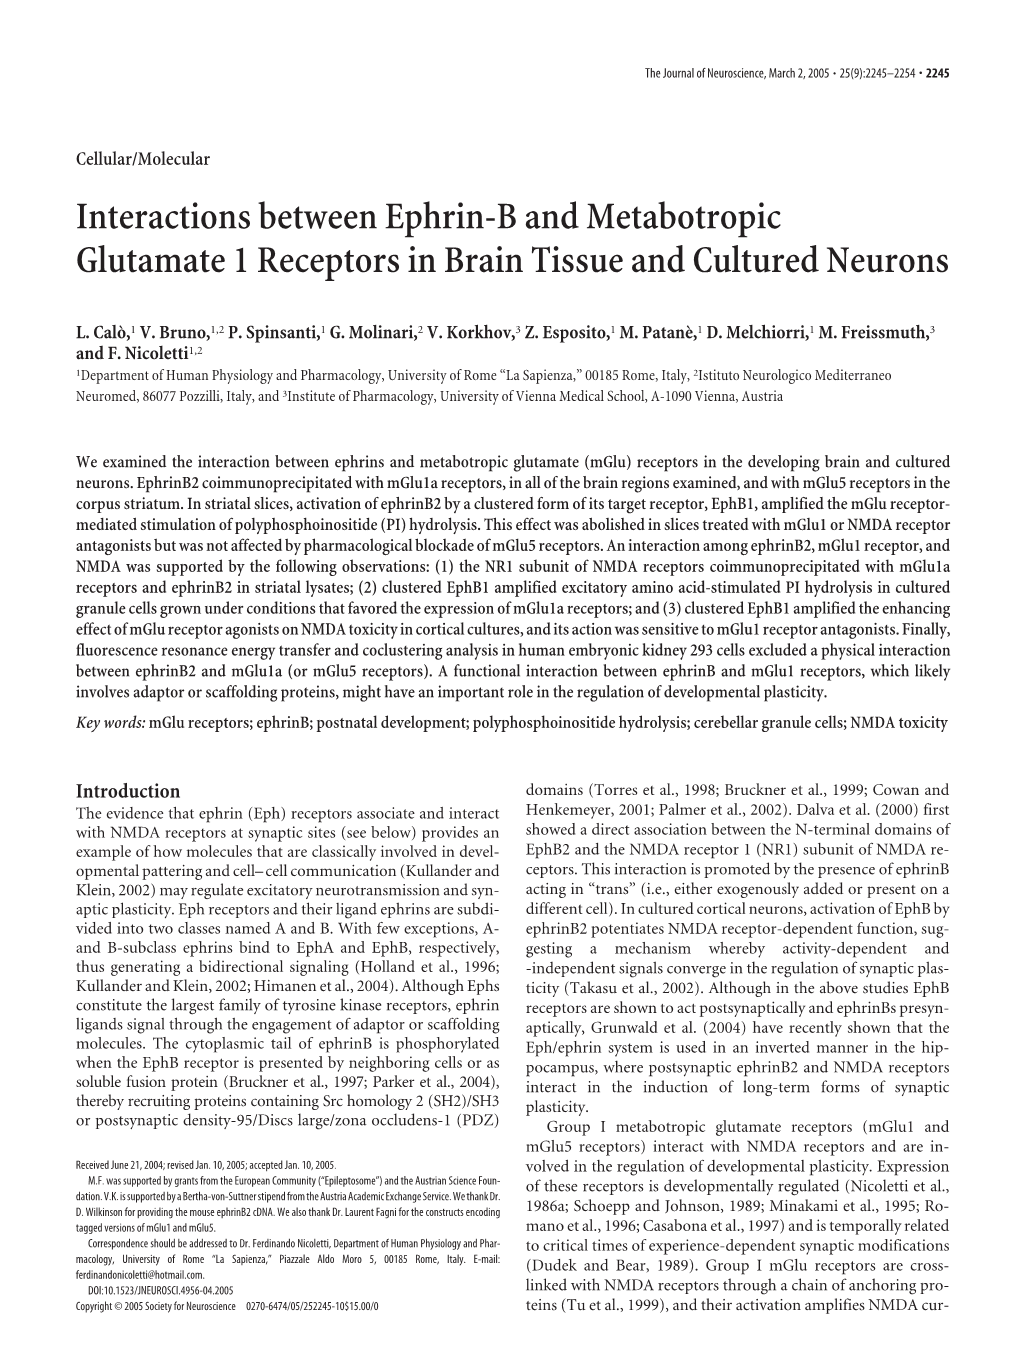 Interactions Between Ephrin-B and Metabotropic Glutamate 1 Receptors in Brain Tissue and Cultured Neurons